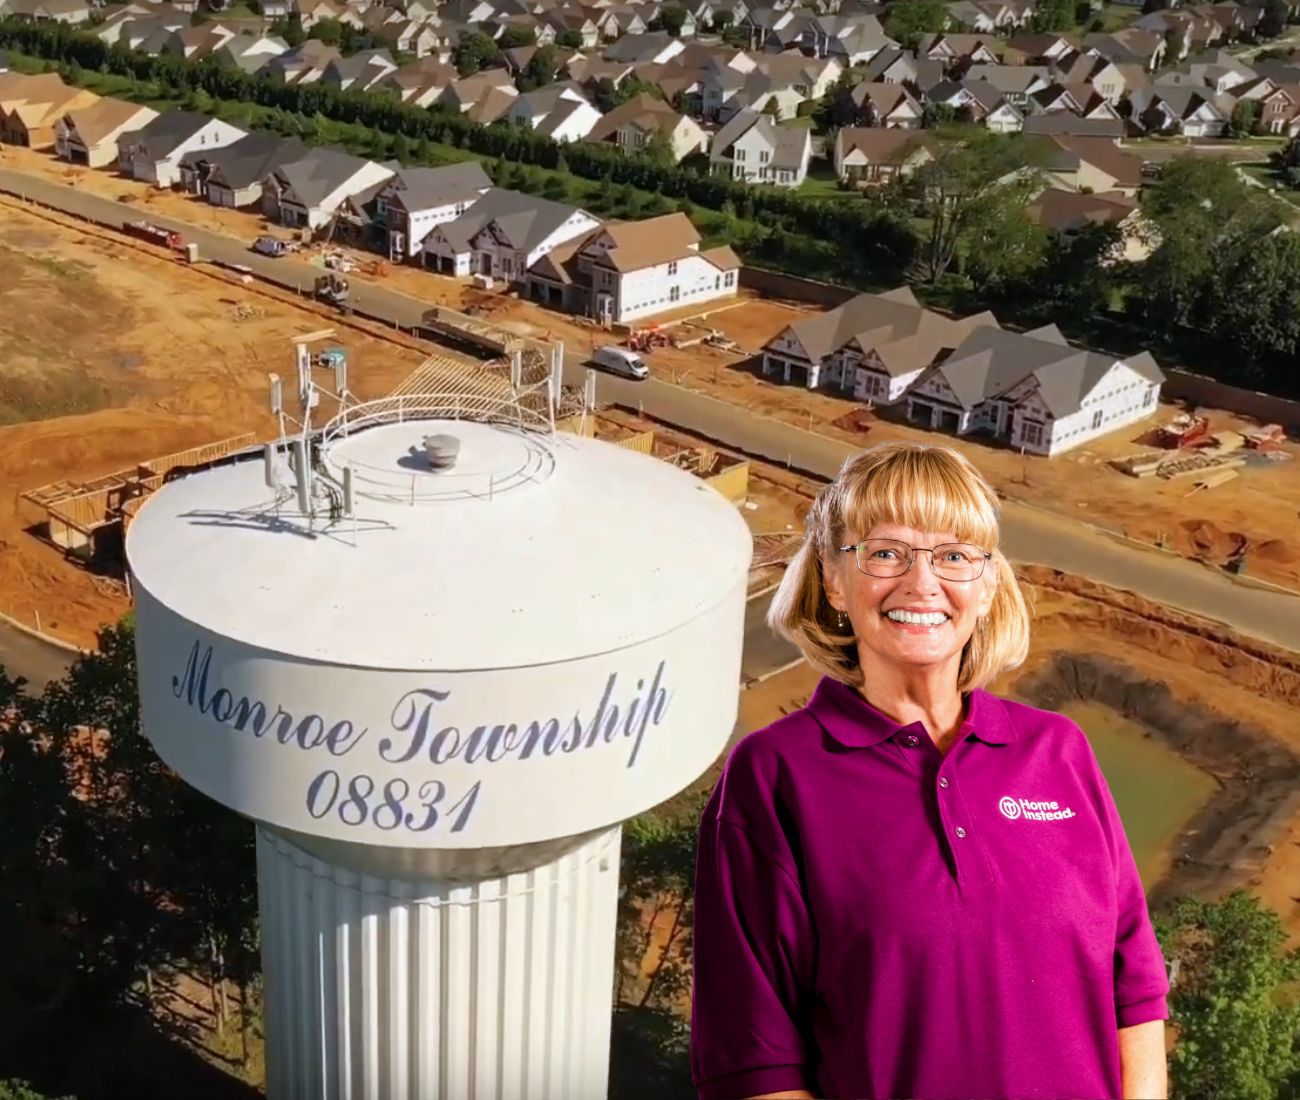 Home Instead caregiver with Monroe Township, New Jersey in the background